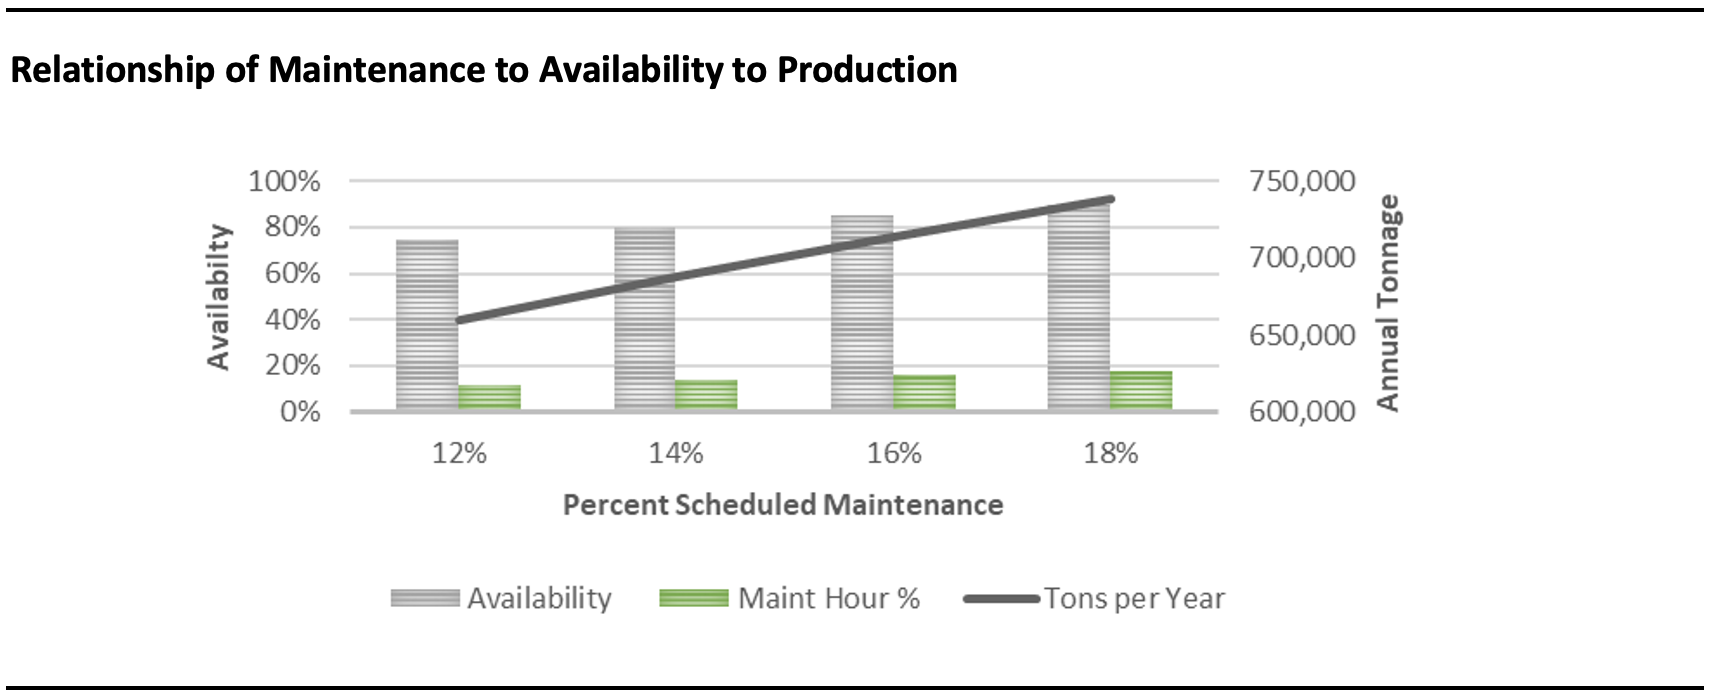 Relationship of Maintenance Availability to Production